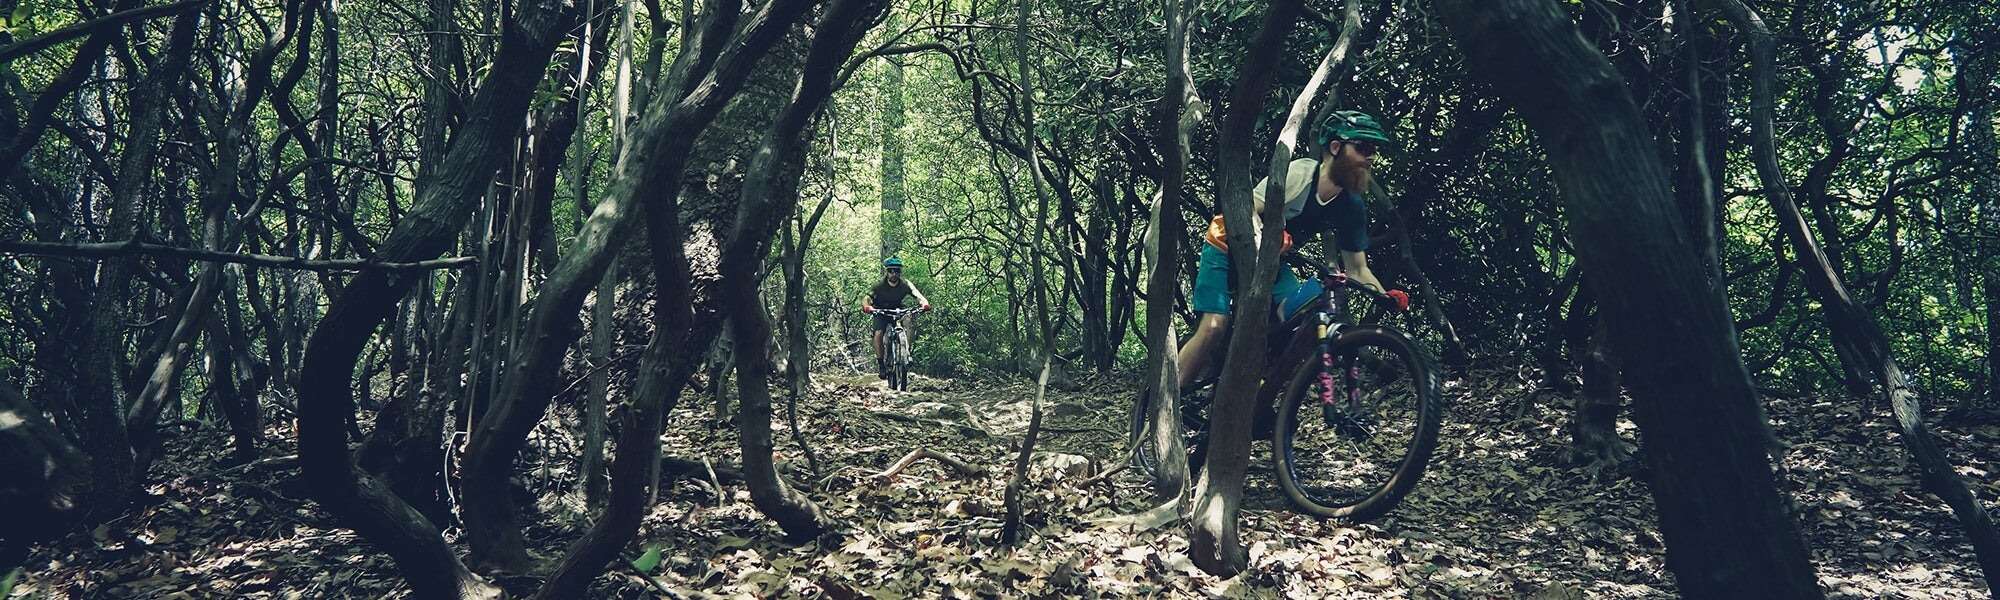 Two cyclists ride mountain bikes through a heavily wooded trail.